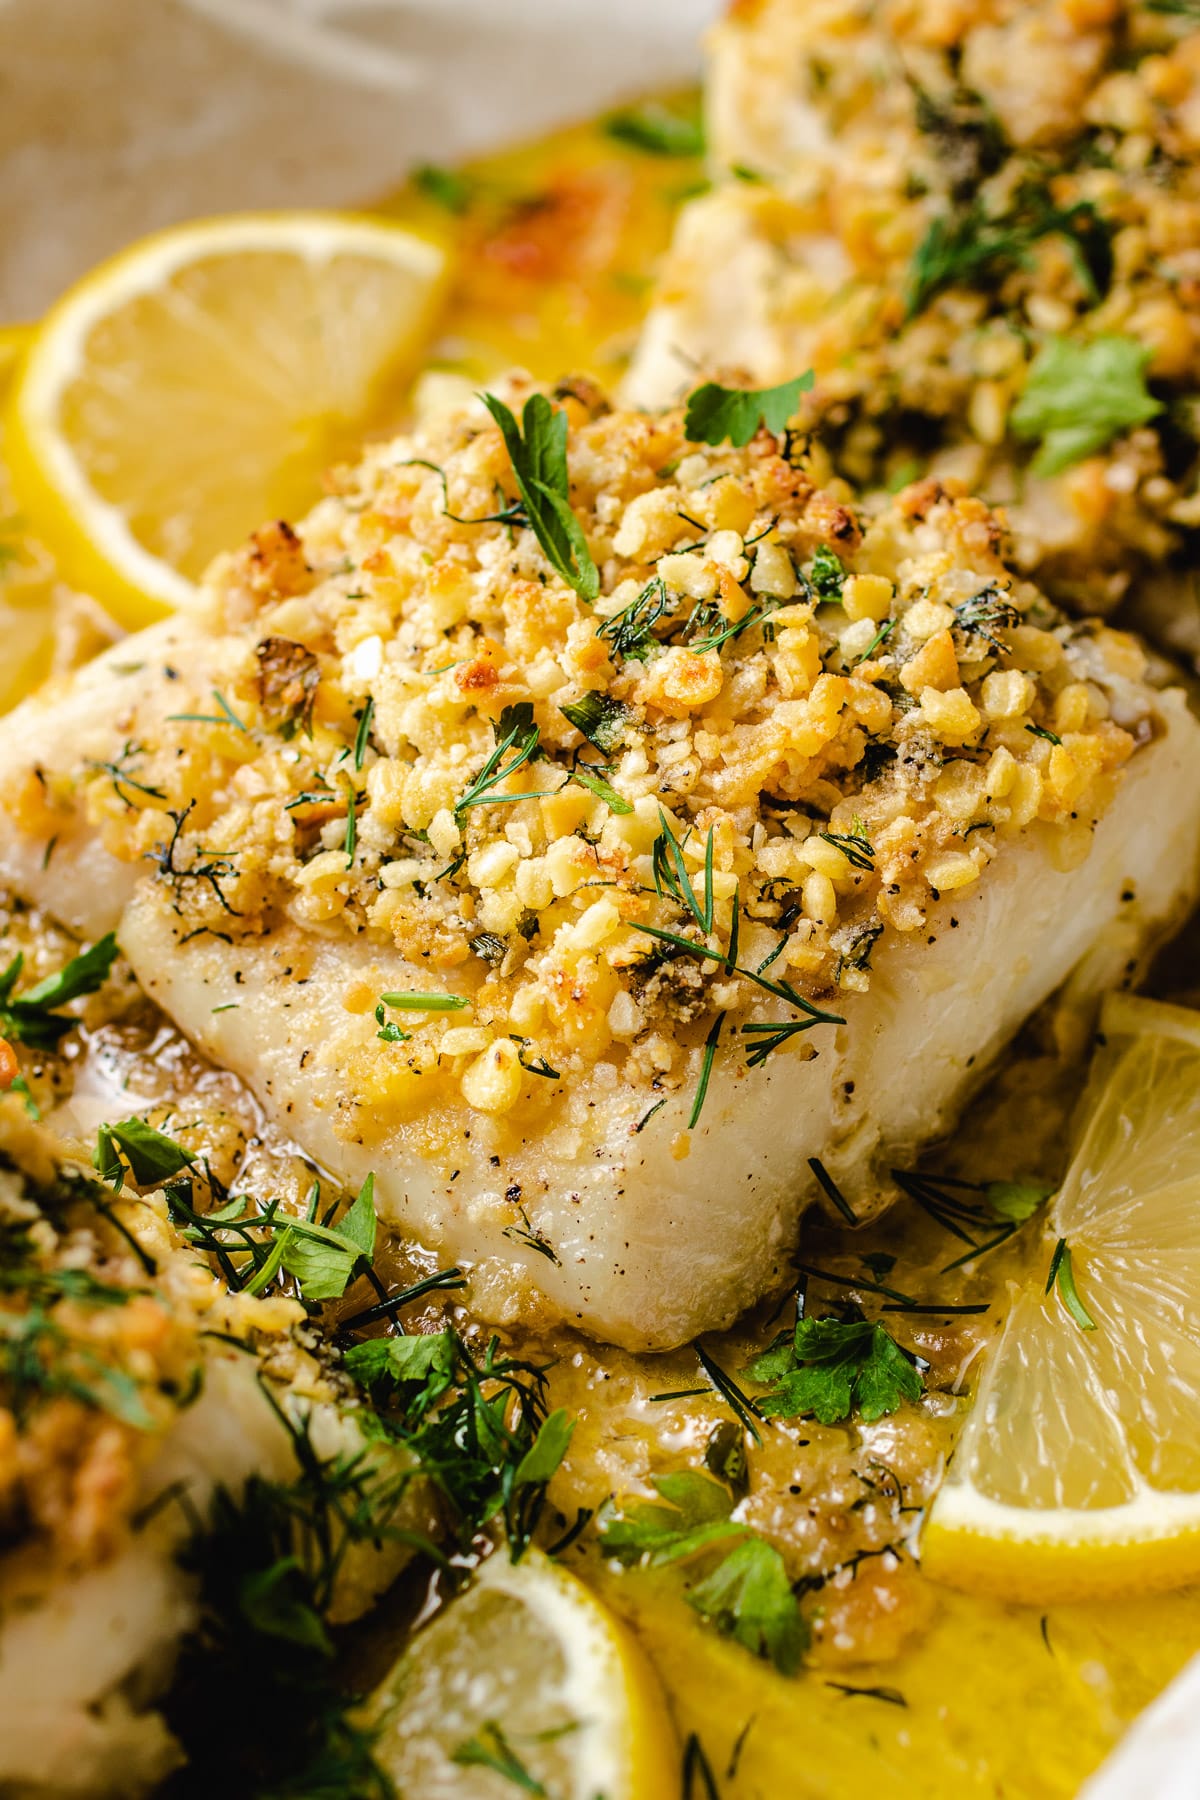 A close shot shows baked panko crust with cod served with lemon on the side